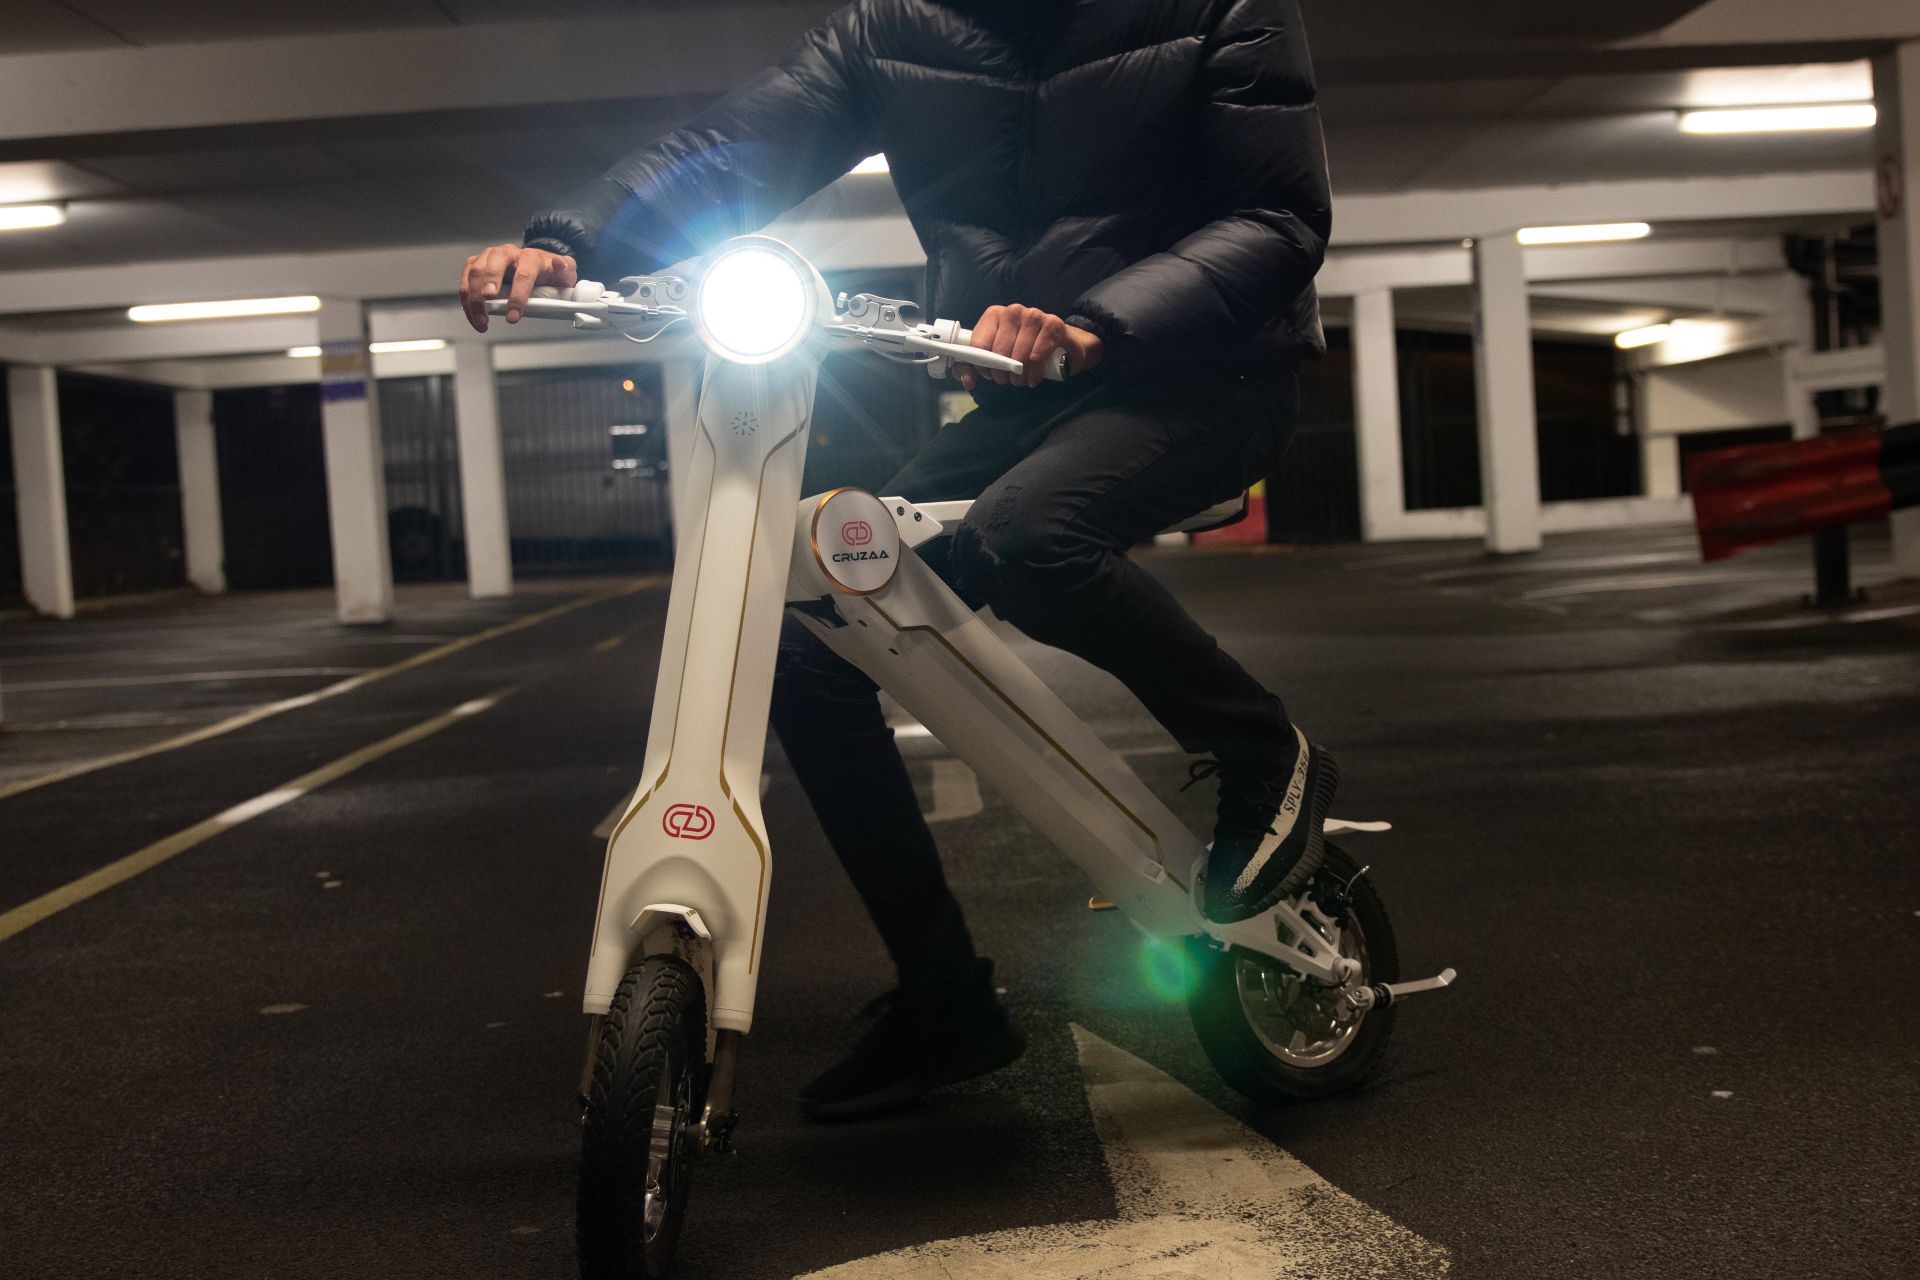 The Limited Edition Cruzaa Electric Scooter - 45km Range & 35kmh Top Speed Cruzaa Built in Bluetooth & Speakers + USB - Magno Green